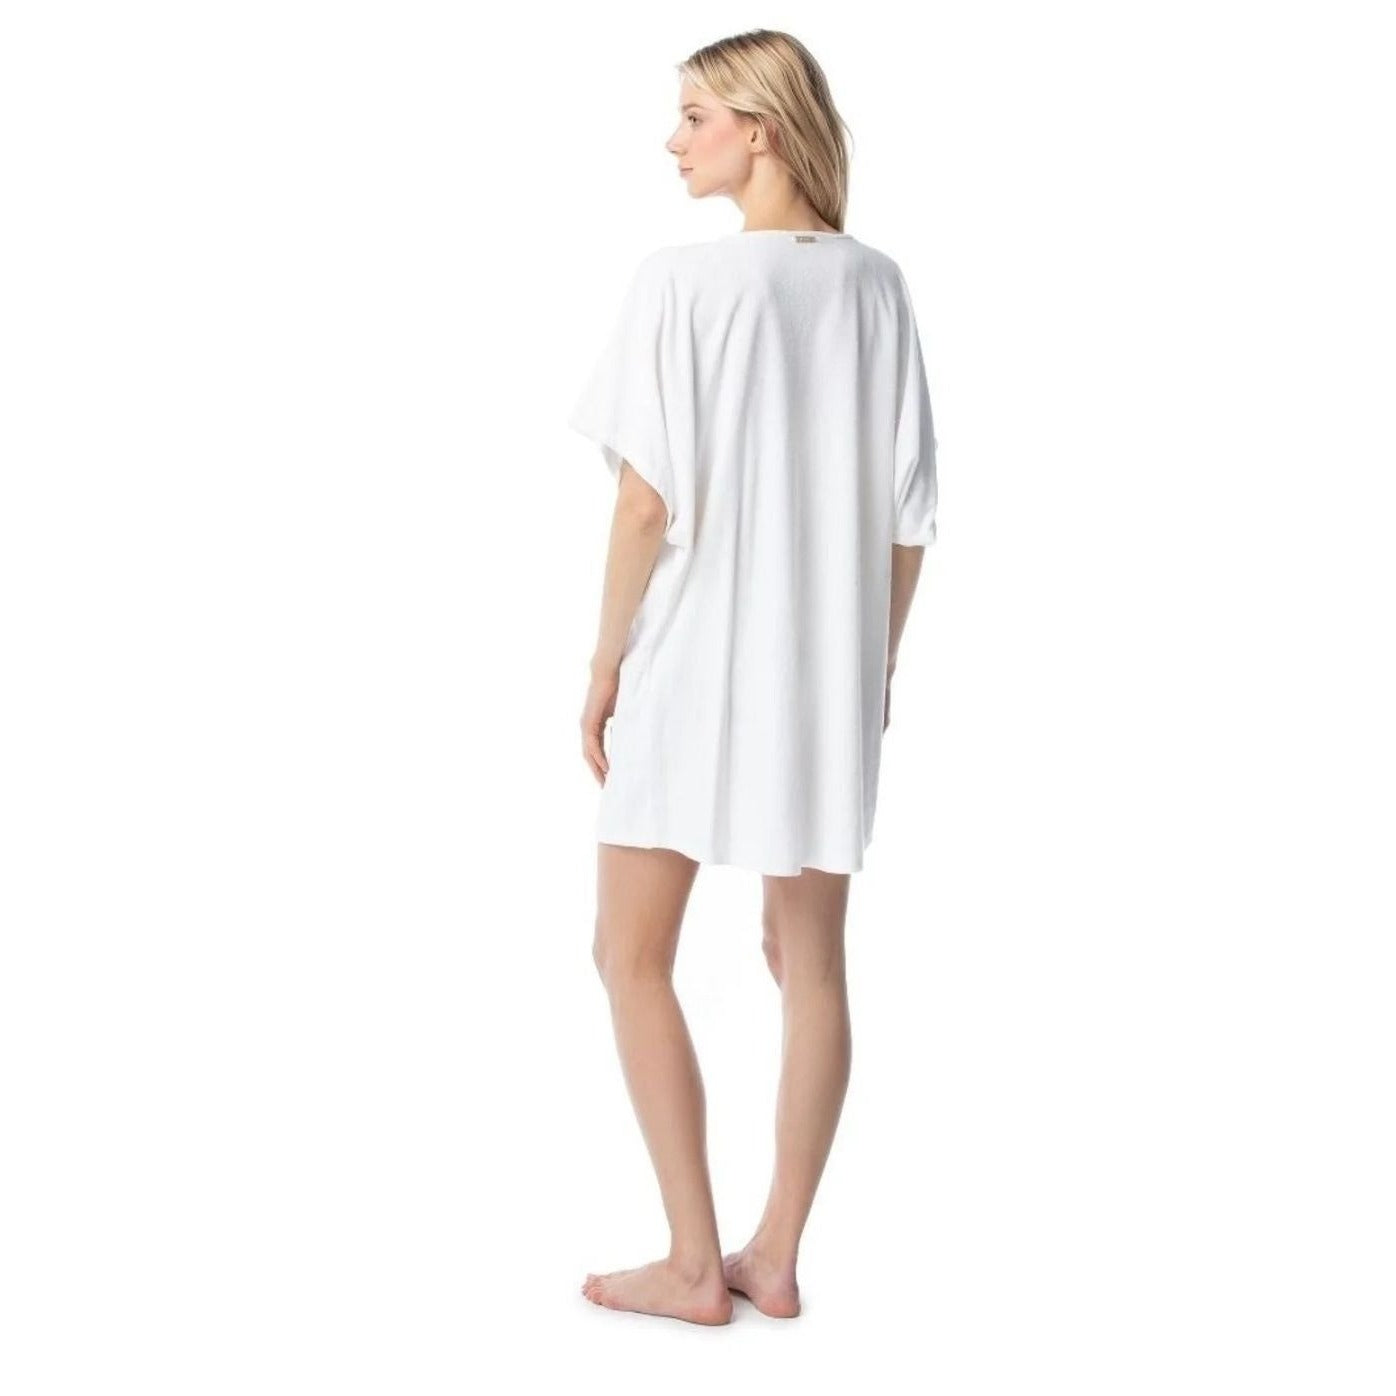 MICHAEL KORS Swimwear Cover-up Terry Cloth Swimsuit Cover Resortwear